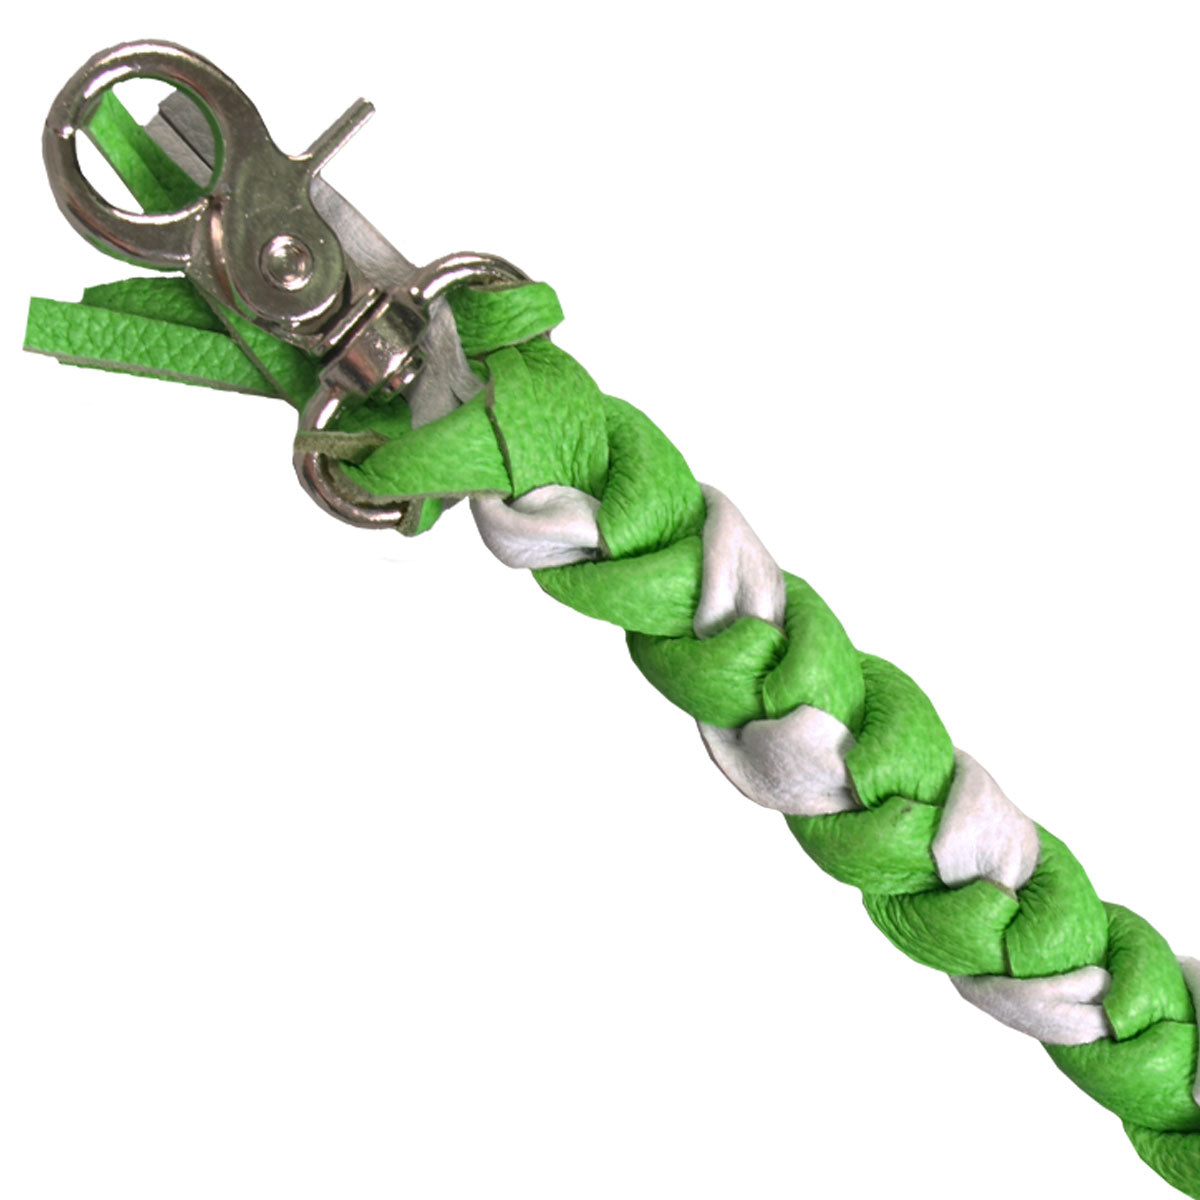 Hot Leathers 9" White and Green Braided Leather Keychain KCW1008